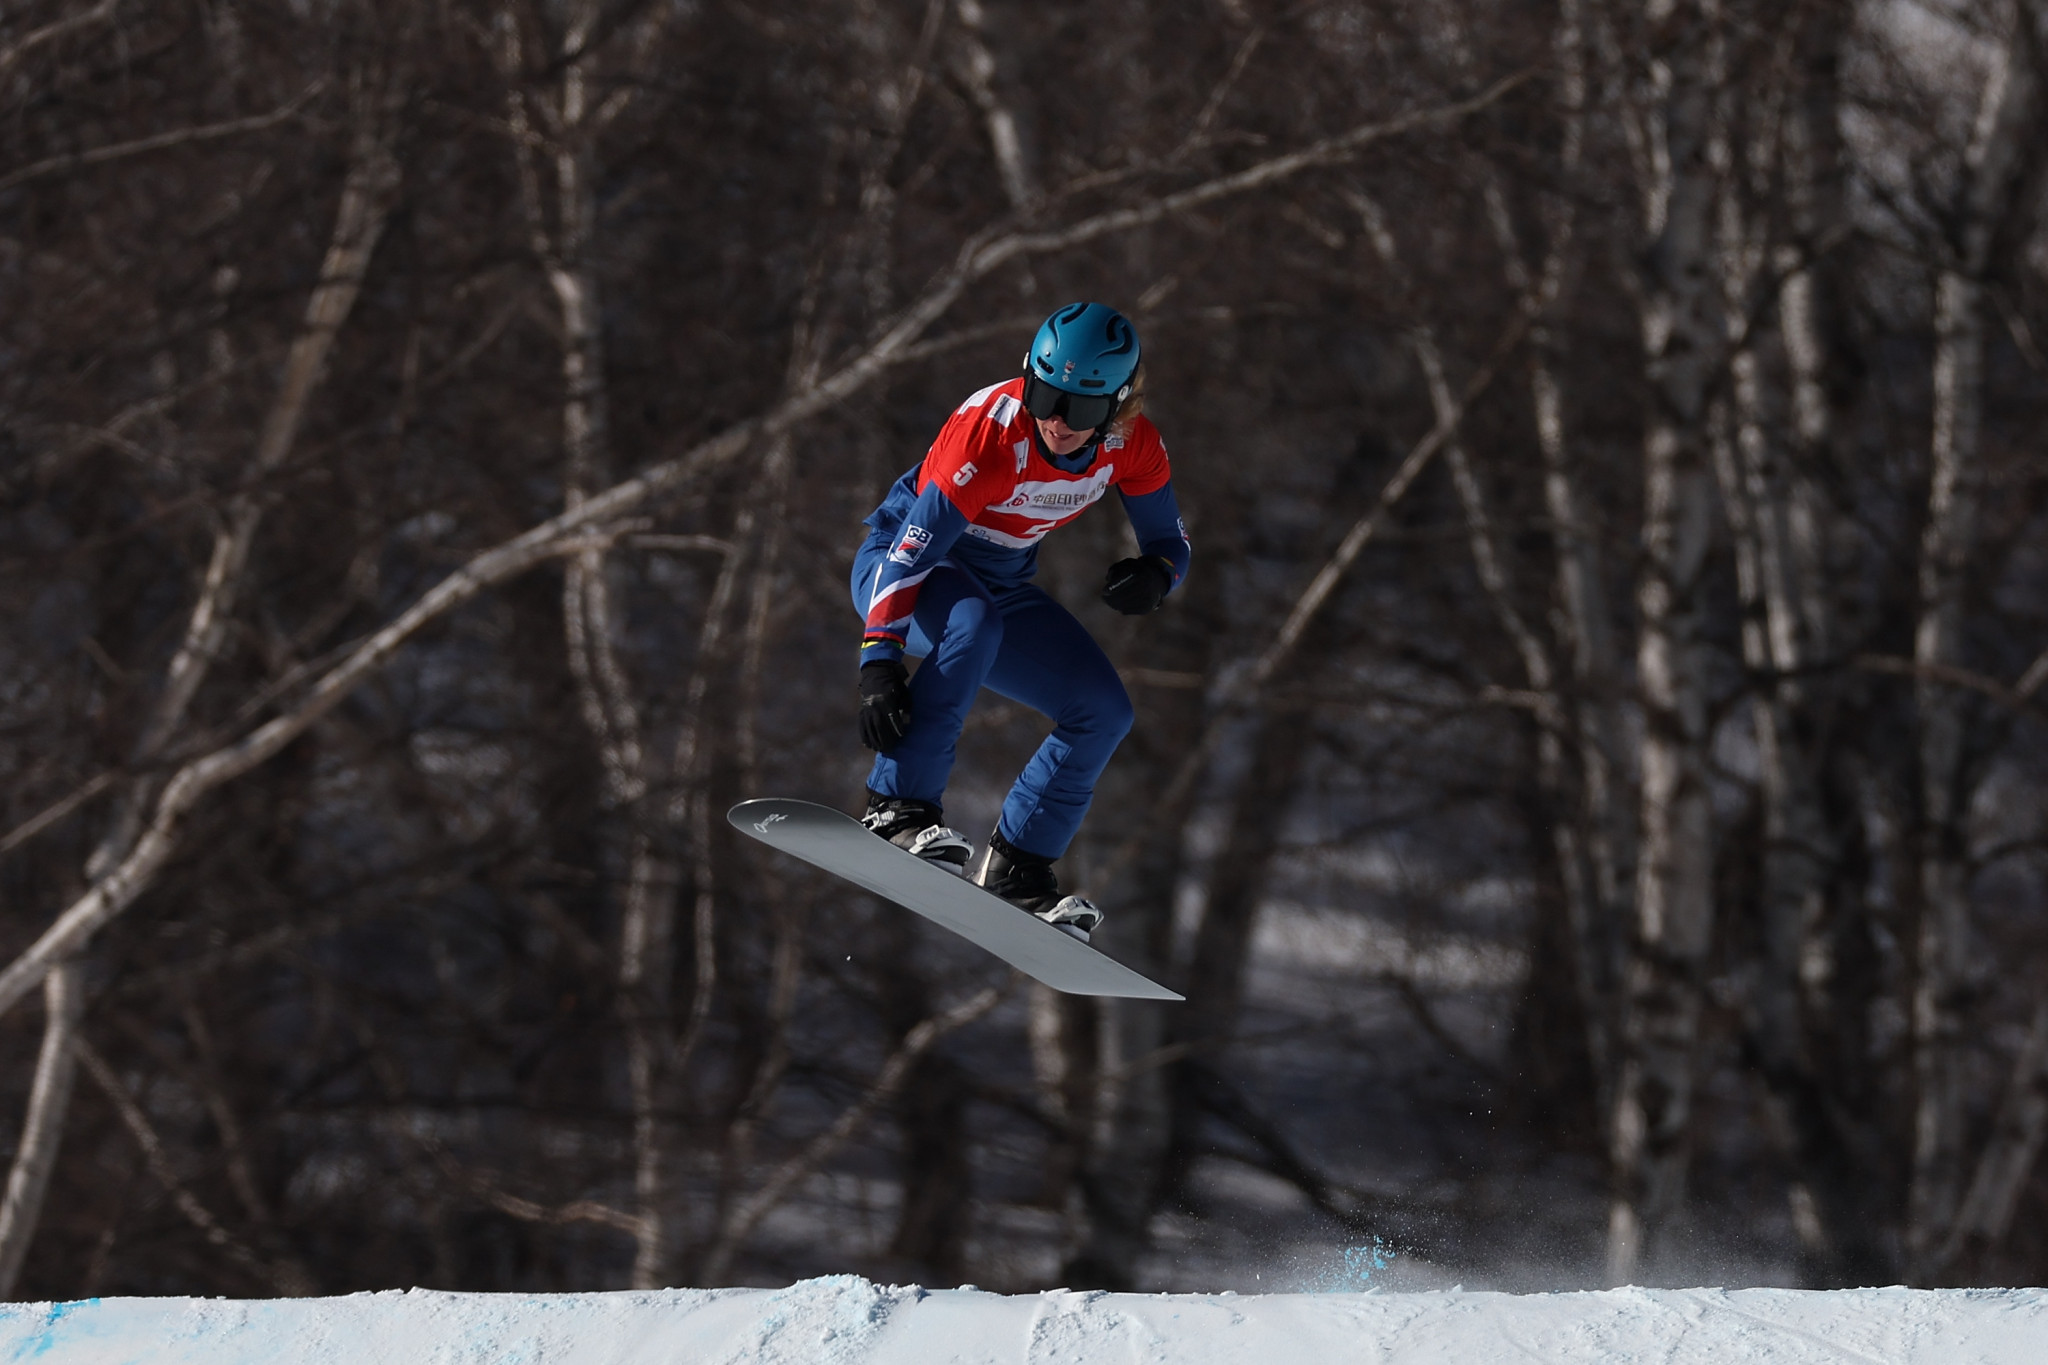 World champion Bankes looks to extend FIS Snowboard Cross World Cup lead